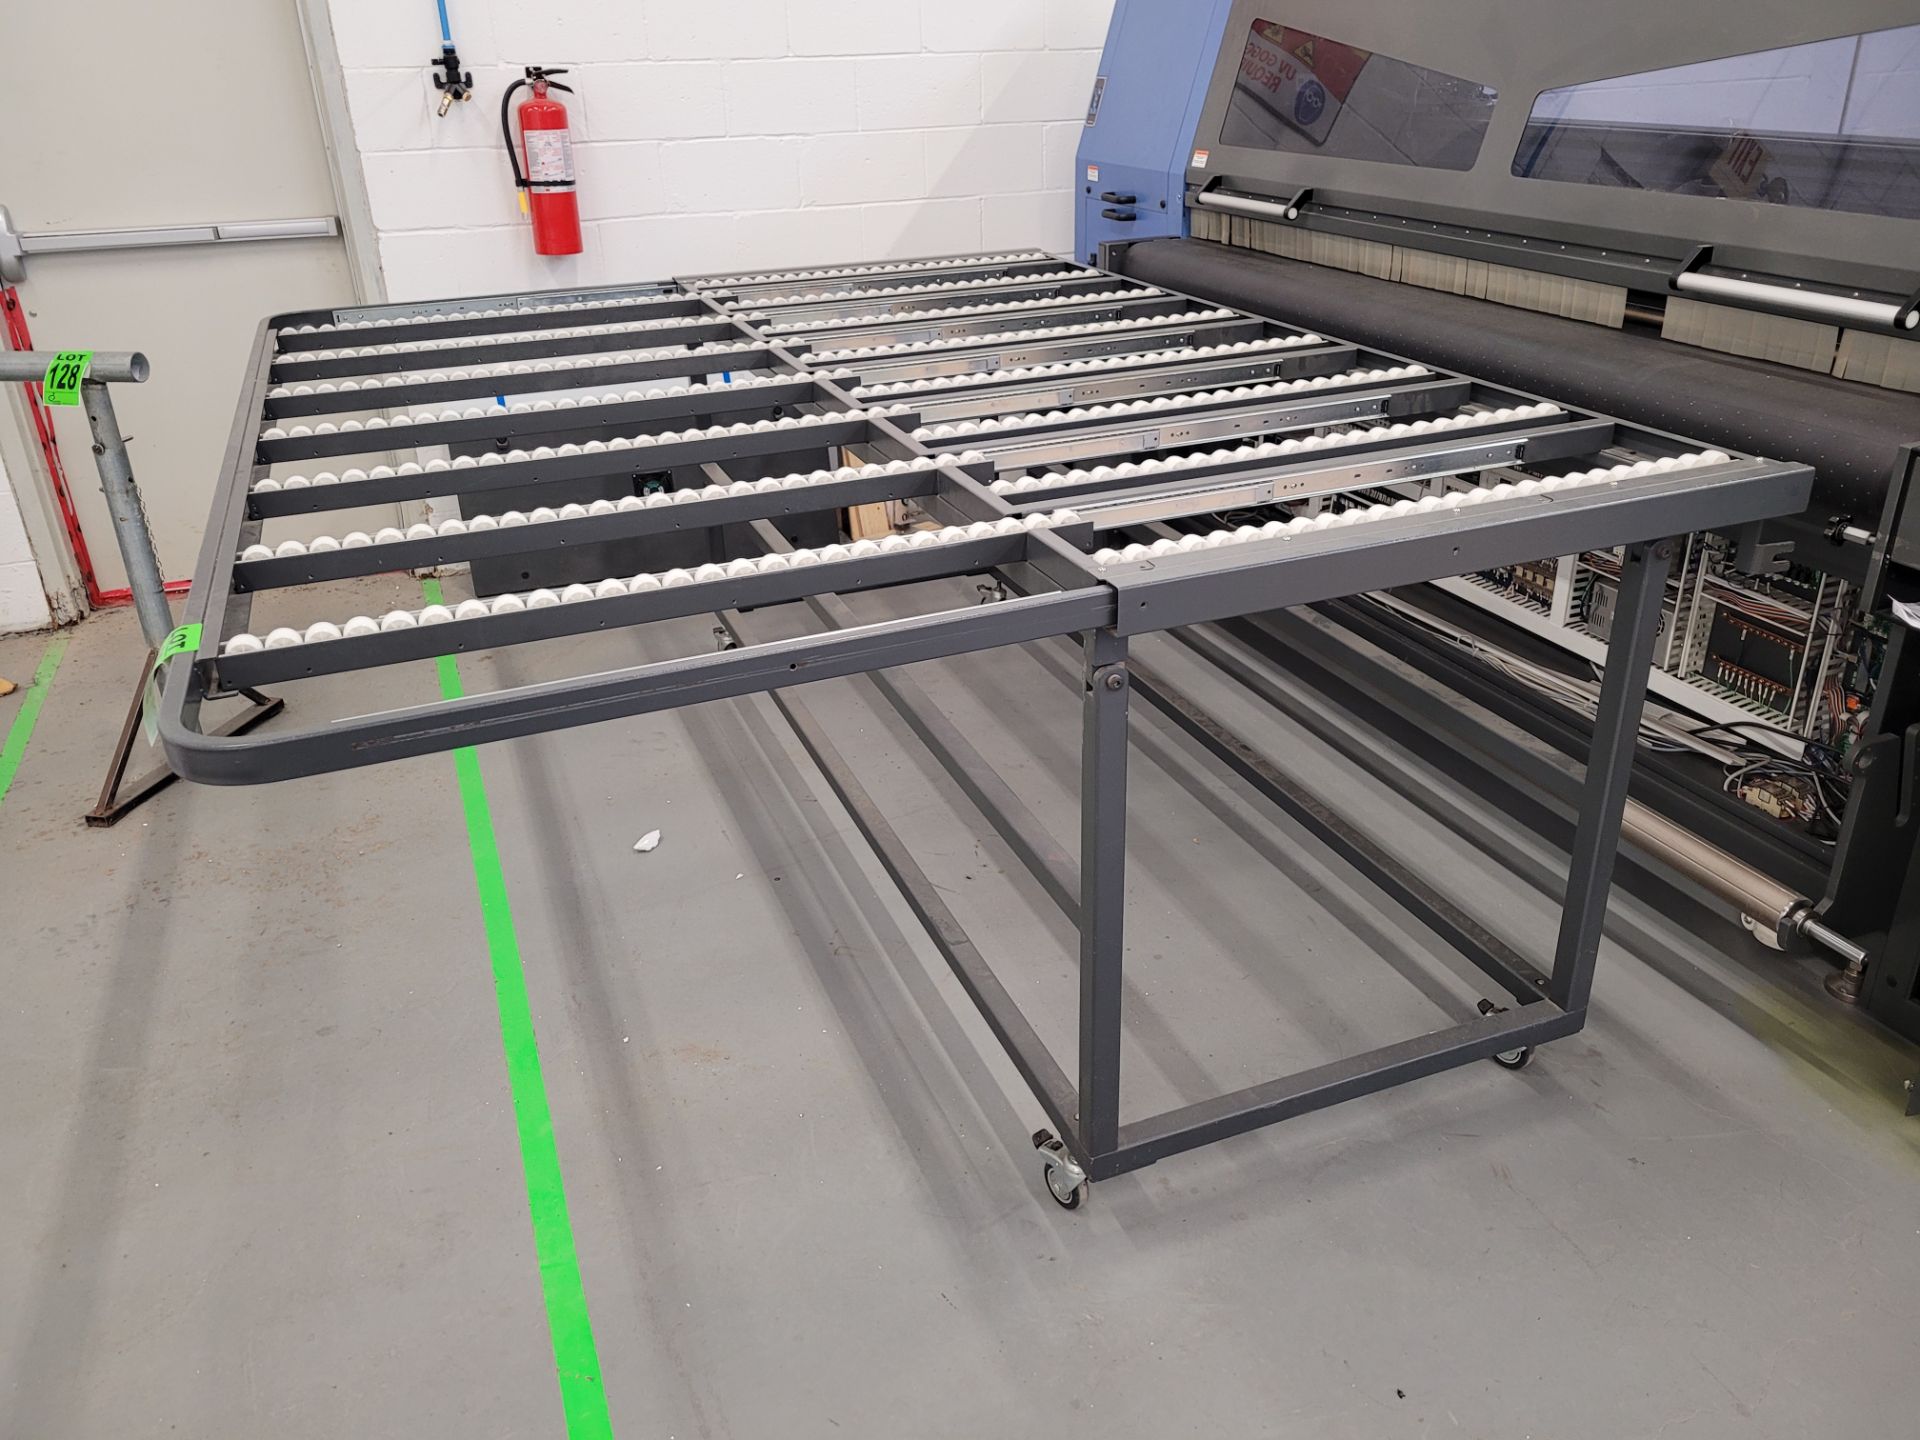 Extendable entry/exit roller conveyor on casters, 92" x 45" x 38" (up to 75") - Image 2 of 4